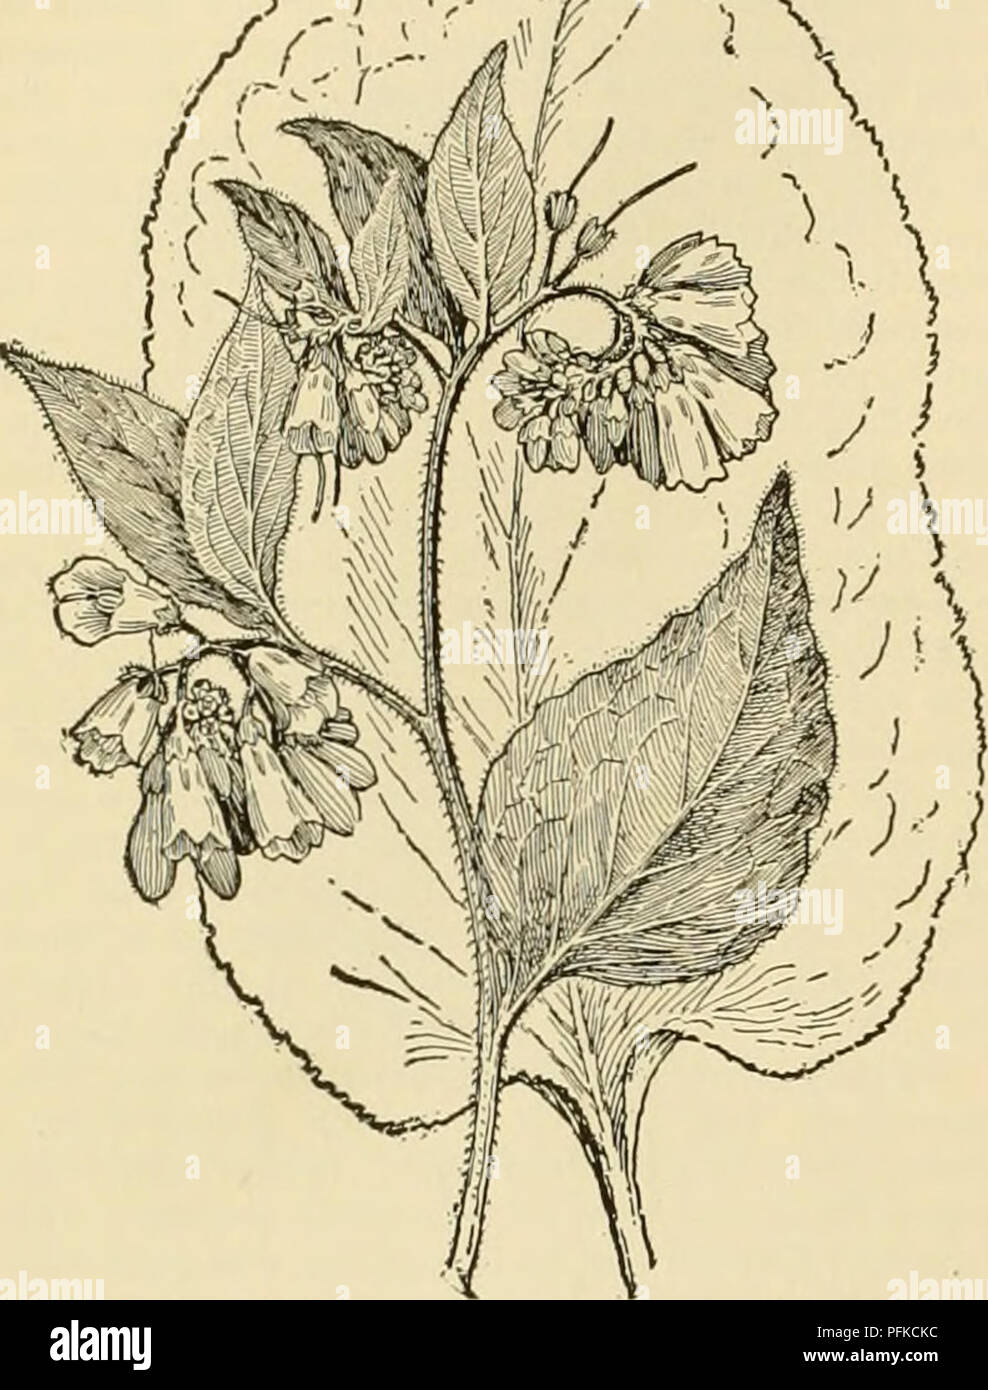 . Cyclopedia of farm crops. Farm produce; Agriculture. 310 FORAGE CROPS FORAGE CROPS time it was thought that the rapid spread of the pest would render farming impossible west of the Mississippi, but at present it is considered harmless and perhaps of some value as a forage plant when fed early. â i. Fig. 421. Prickly comfrey (Symphytum asperrimum). Sacaline {Polygonum Saehalinenne). Polygonacece. A tall bushy perennial (6-12 ft.) forage plant that gives little promise. It does not grow well from seeds, but may be propagated by root-cuttings. The stems are woody when two to three feet high ;  Stock Photo